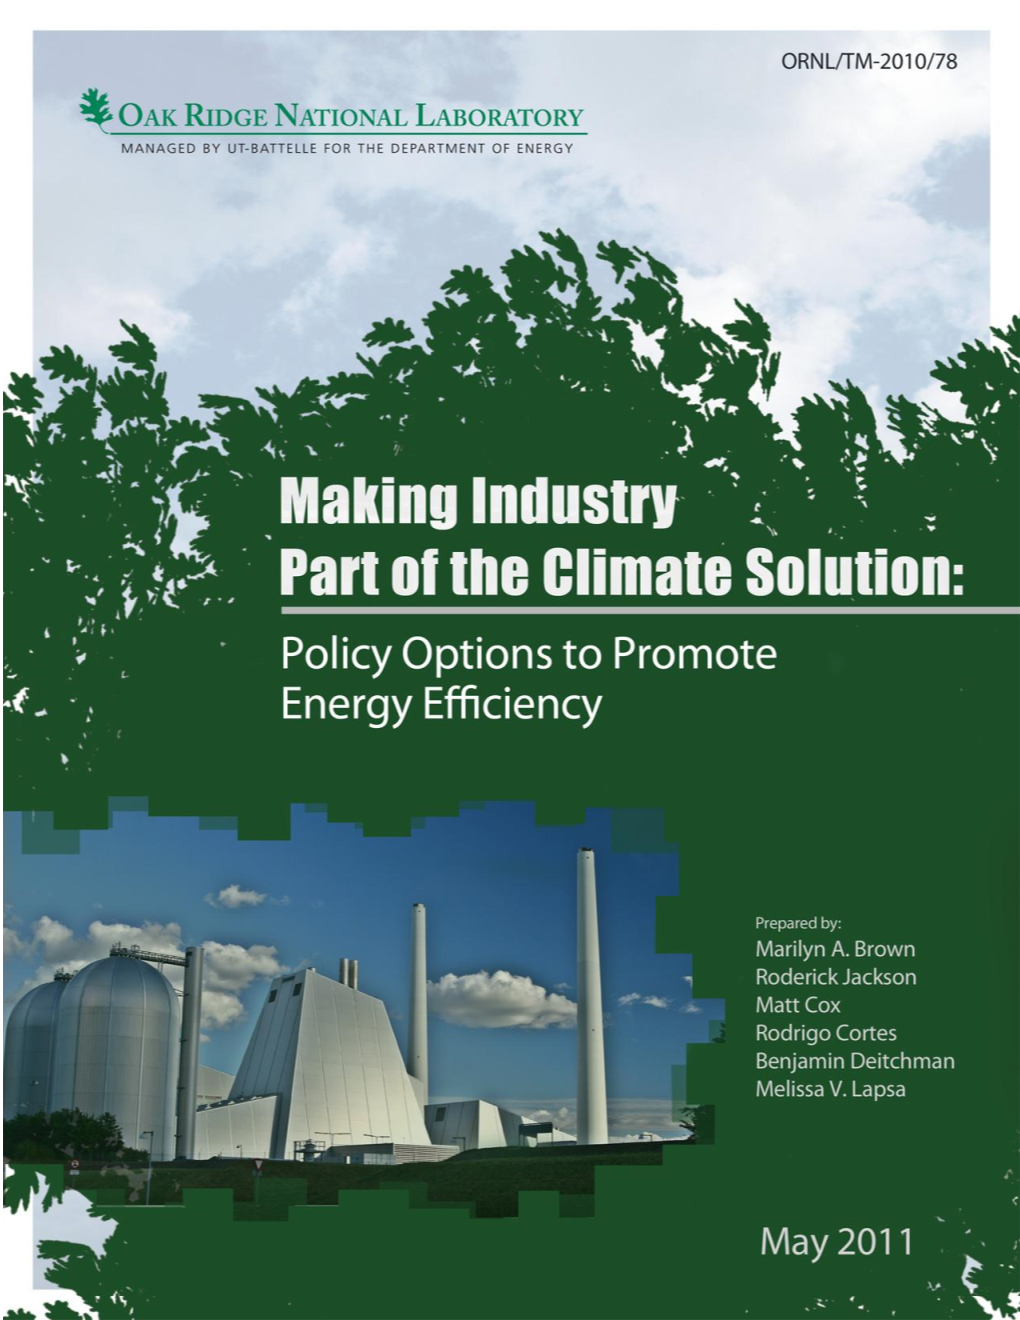 Policy Options to Promote Energy Efficiency